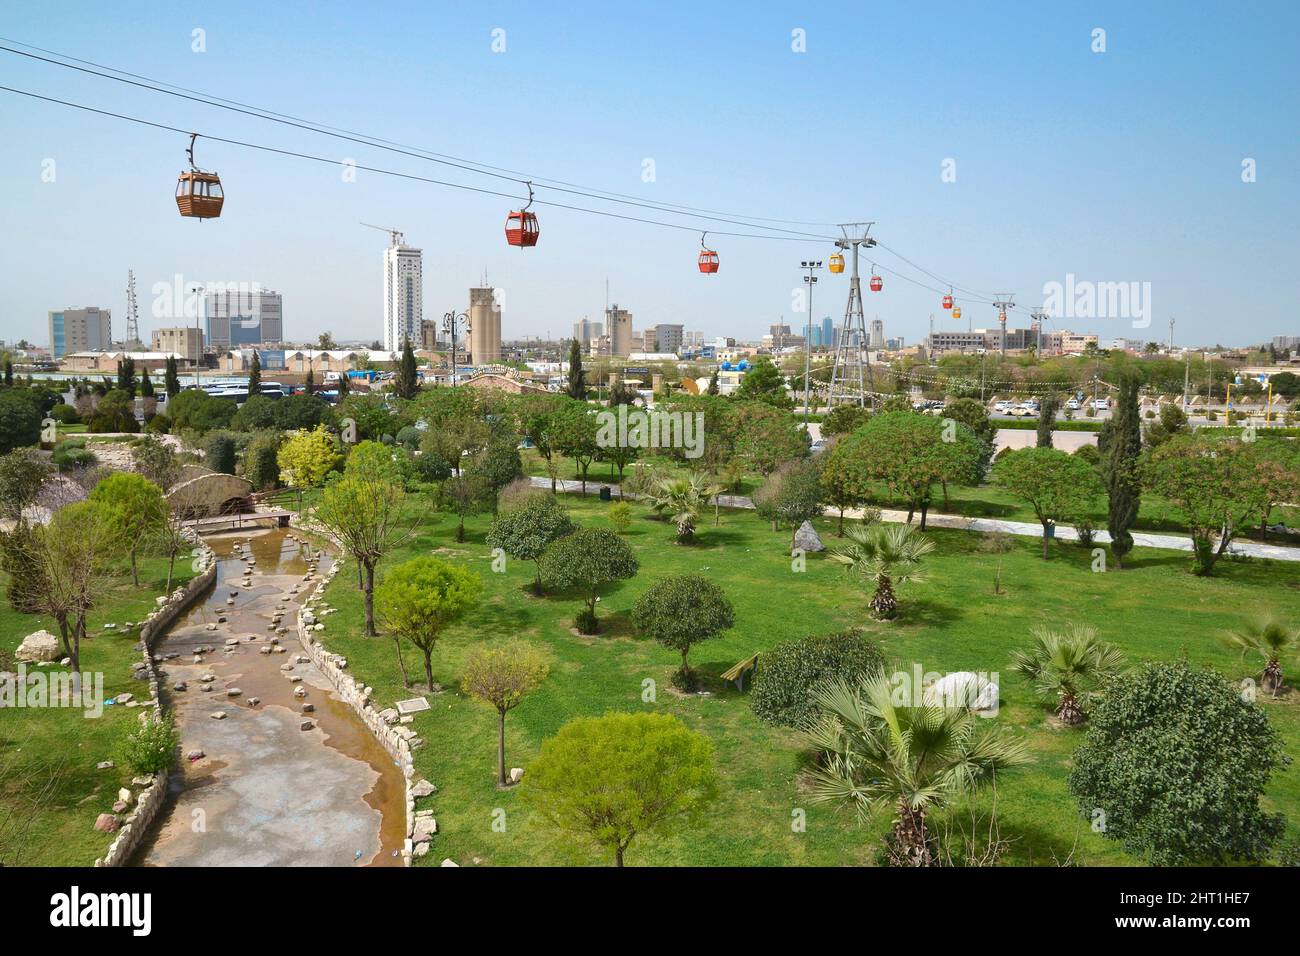 Erbil, Iraq - March 23, 2018: Cable car connecting Minare Park and Shanidar Park 2 in the city of Erbil in Kurdish Iraq. Stock Photo